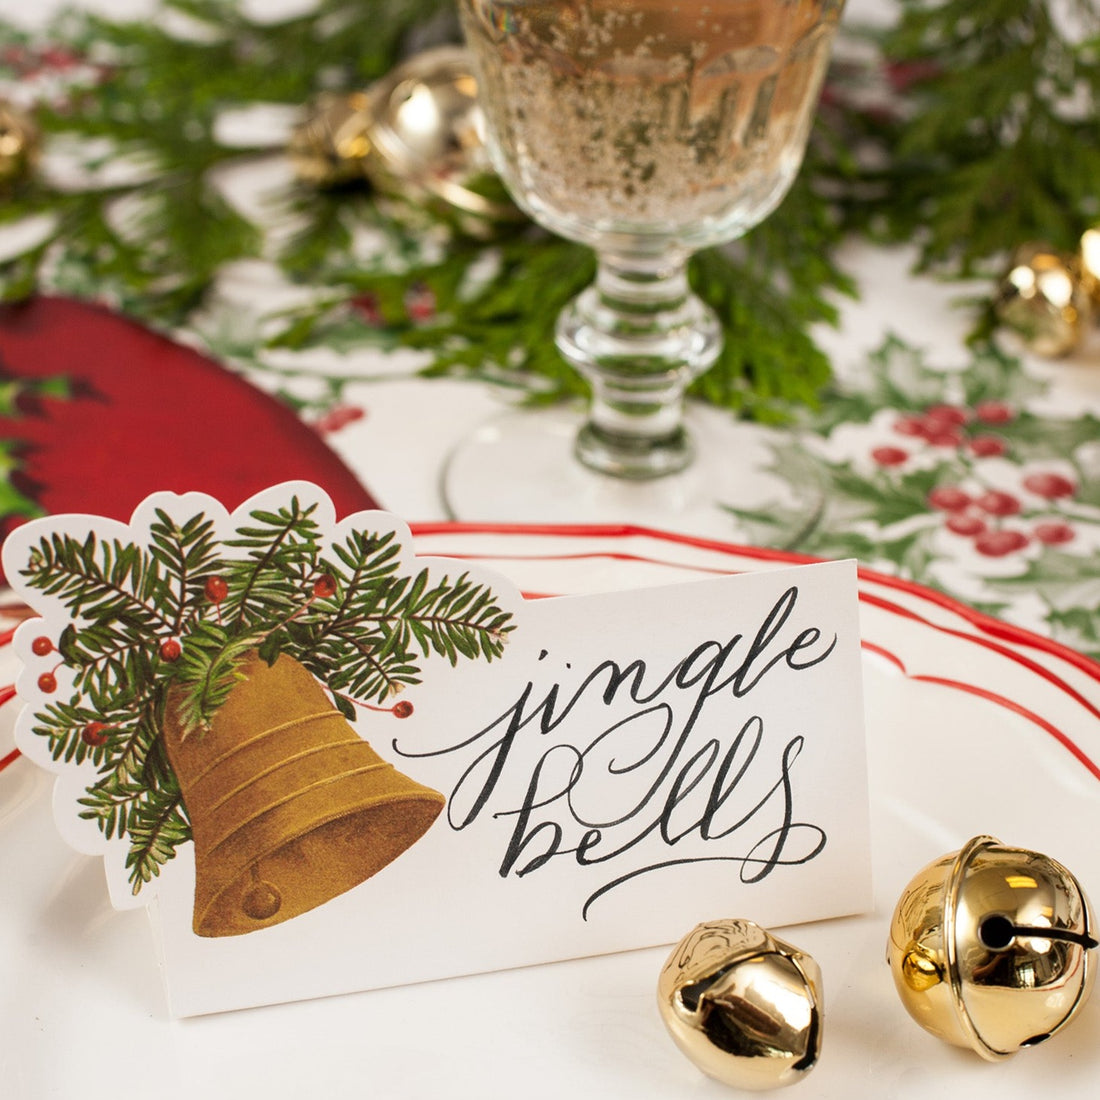 Close-up of a Bell Place Card reading &quot;jingle bells&quot; on a festive holiday place setting.